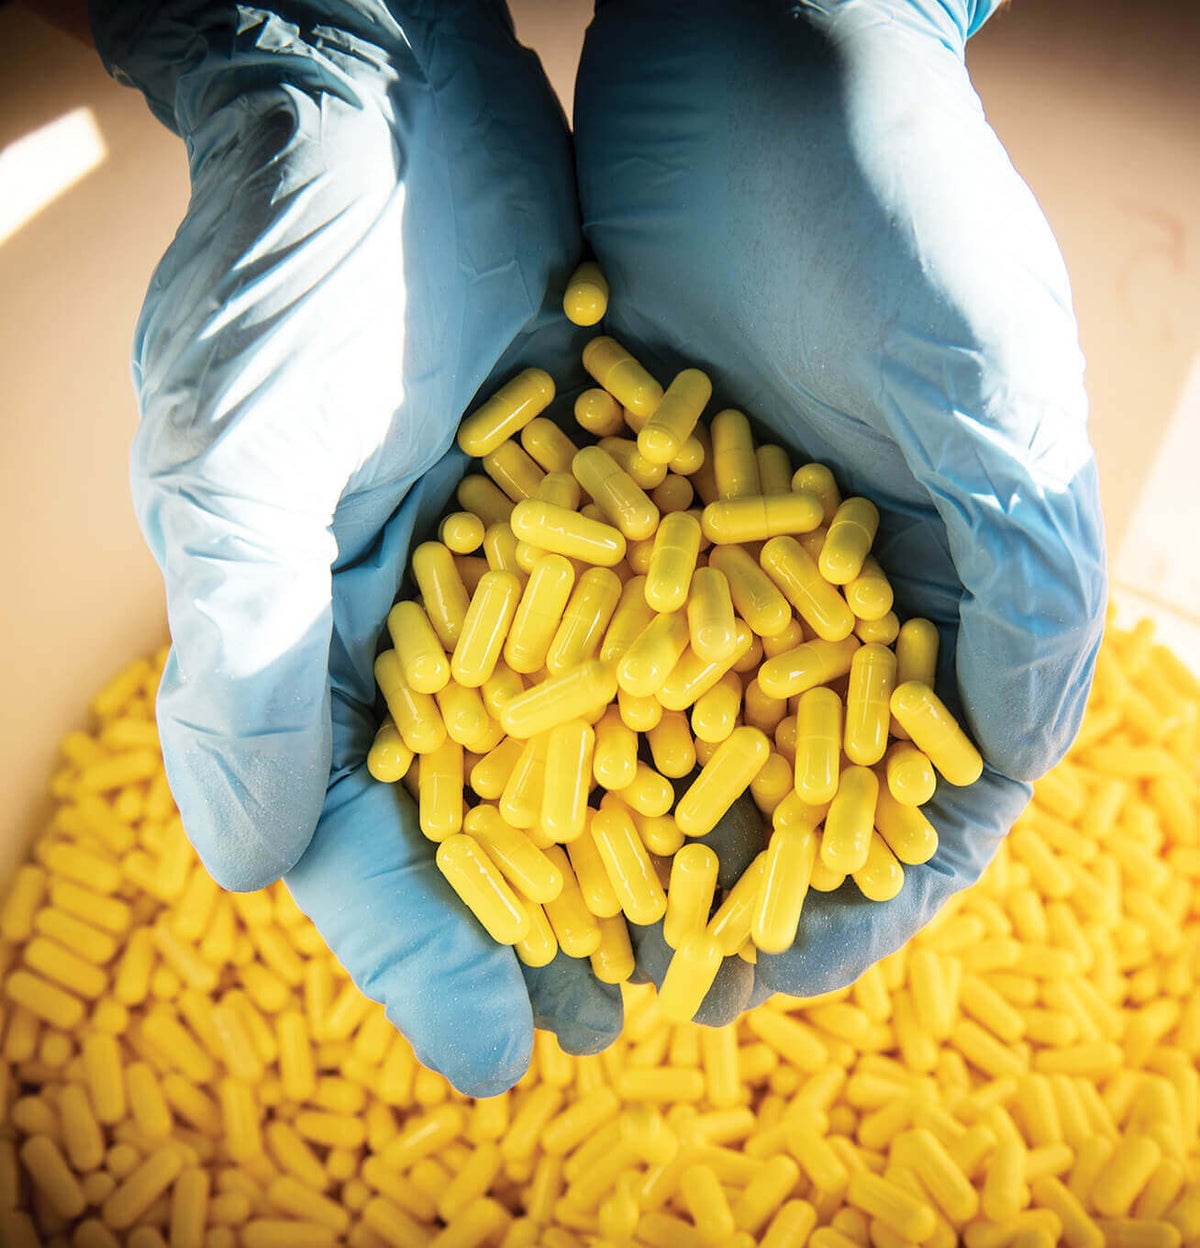 Hands wearing blue rubber gloves holding yellow pills above a bucket full of those yellow pills.